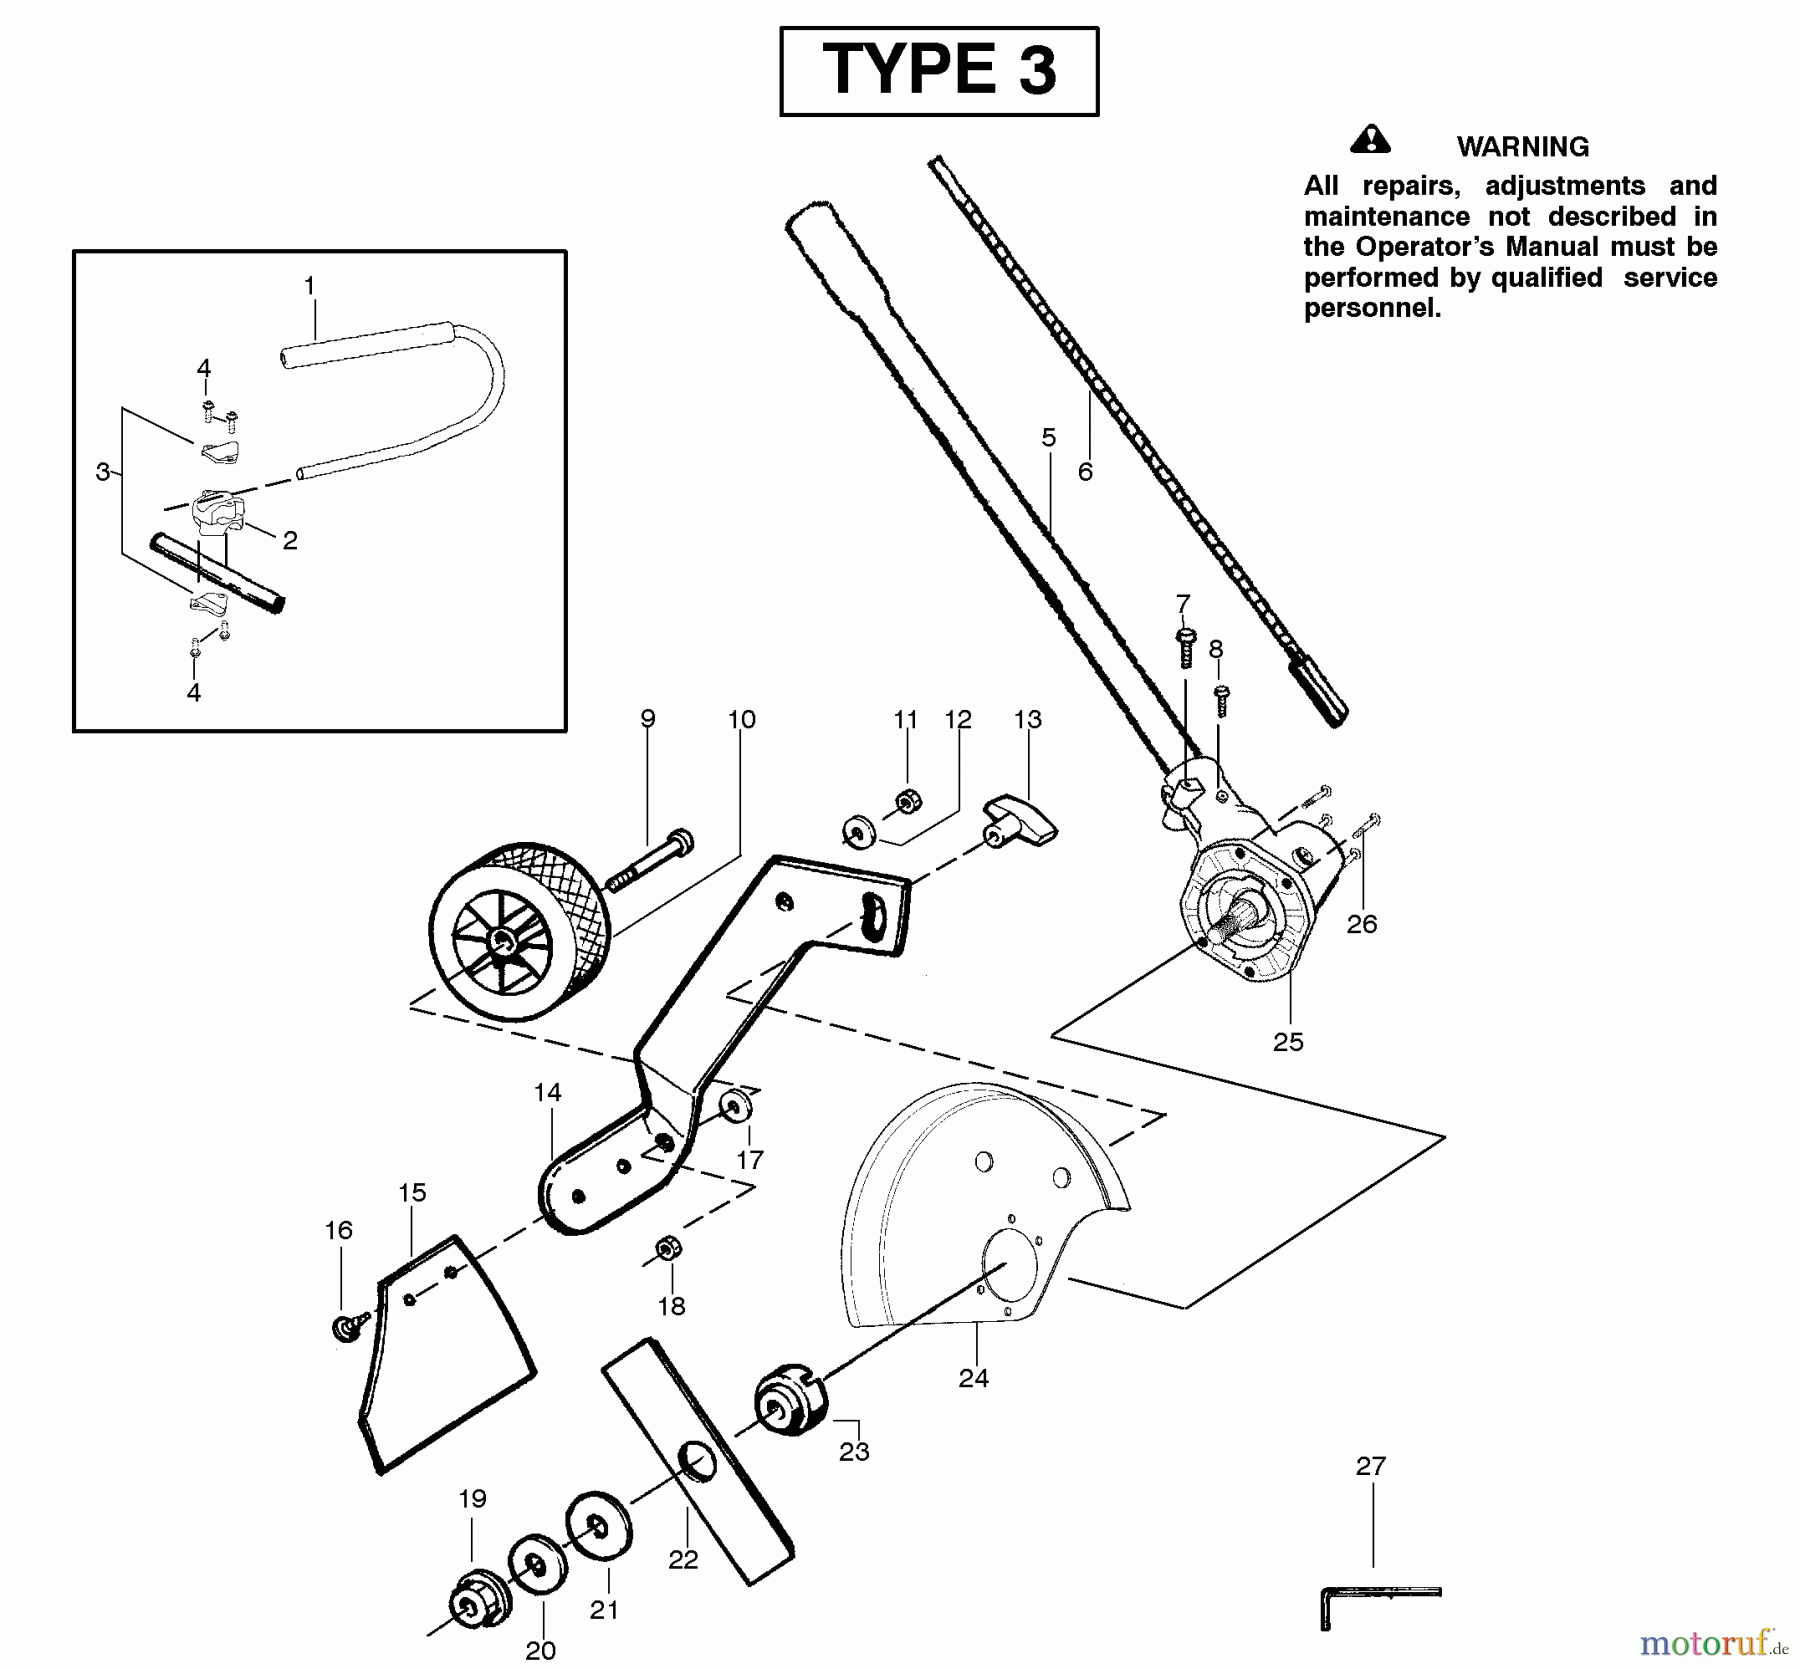  Poulan / Weed Eater Zubehör 1000E (Type 2) - Weed Eater Weed NEdge Edger Attachment Edger Attachment Assembly Type 3